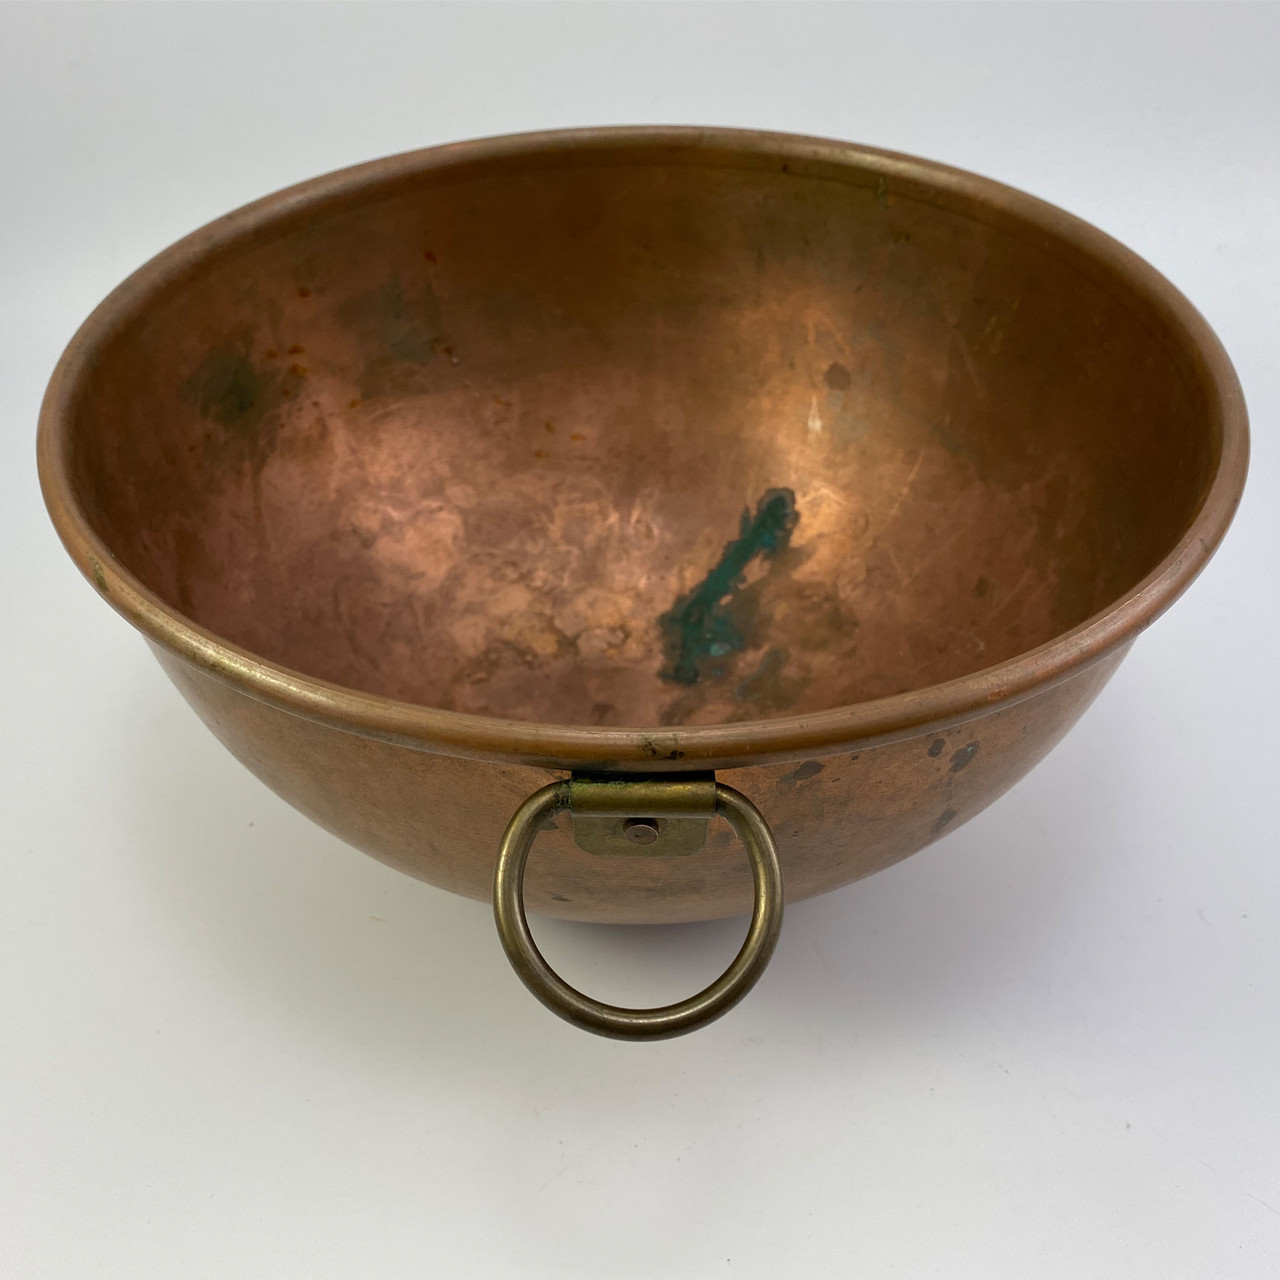 https://cdn11.bigcommerce.com/s-2b7gyksakj/images/stencil/1280x1280/products/605/2186/copper-bowl-side-with-ring__72198.1674263575.jpg?c=1